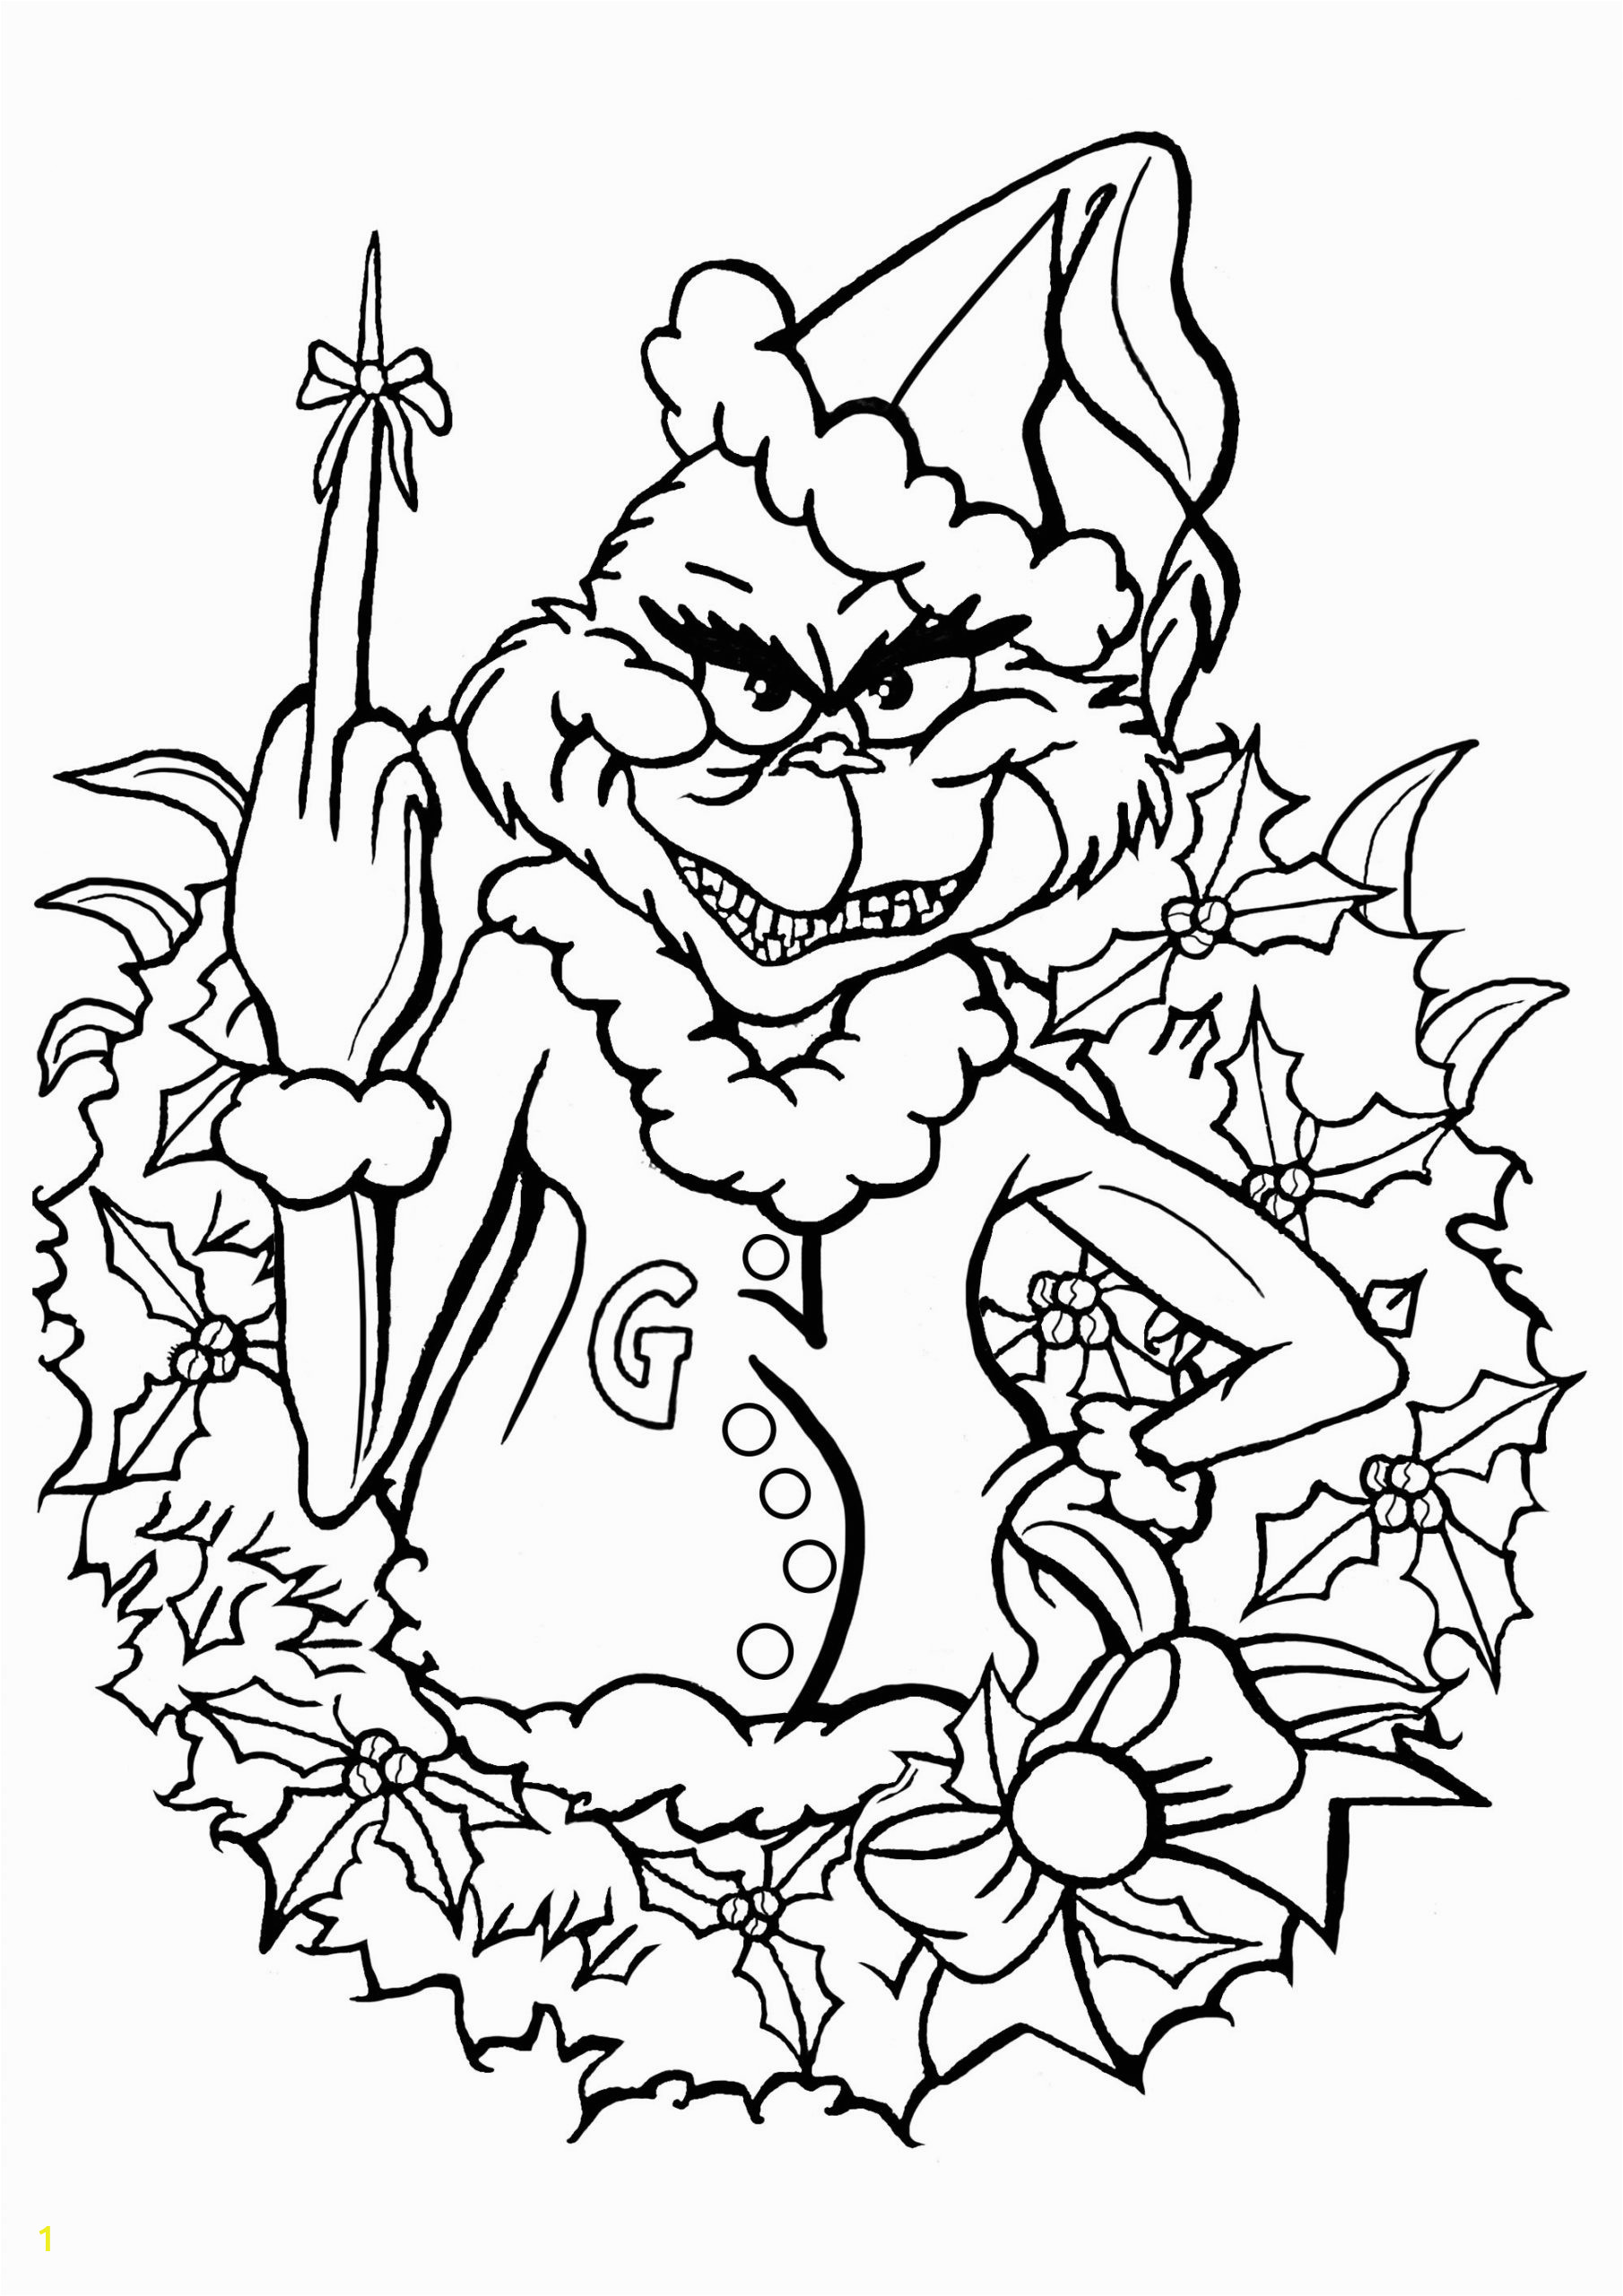 religious christmas coloring pages pretty girl ballerina childrens books flower book hunting space for adults kids trolls printable zombie lighthouse black adult kerby rosanes scaled